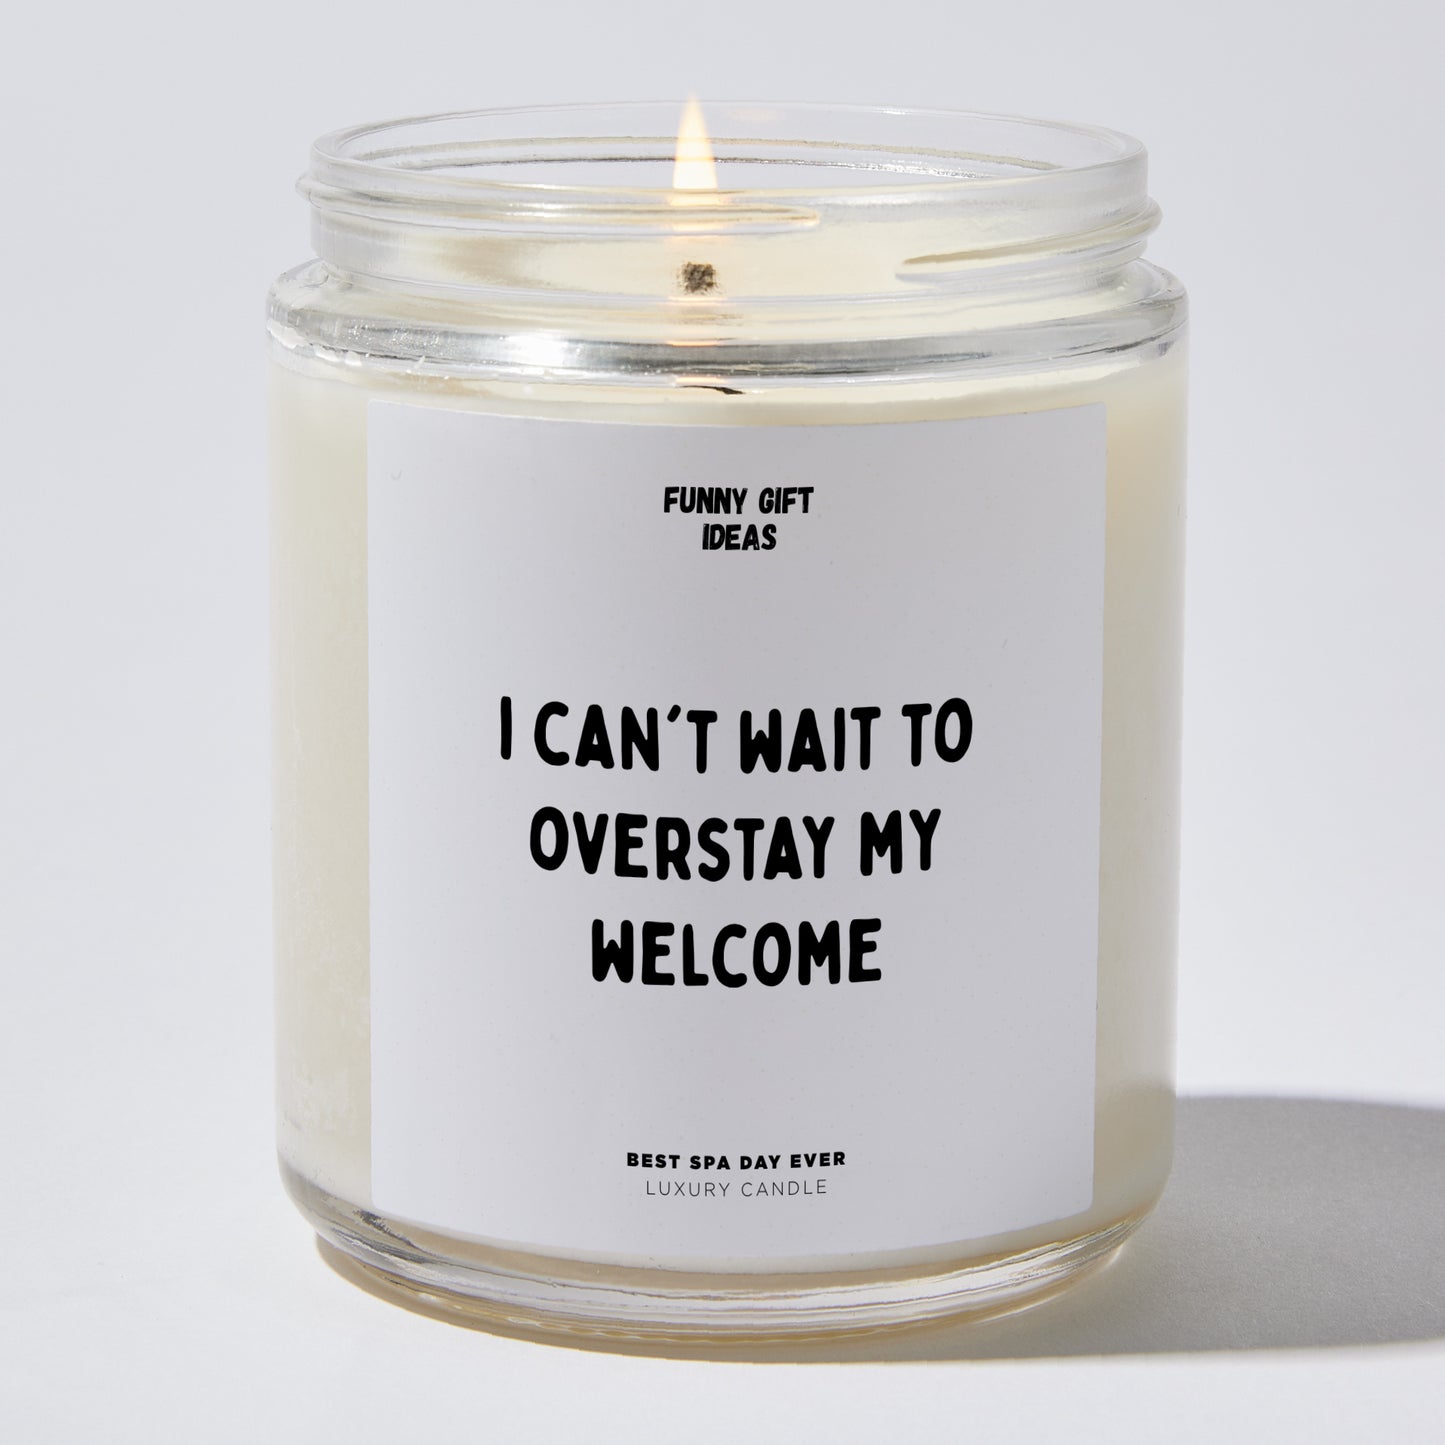 Unique Housewarming Gift - I Can't Wait To Overstay My Welcome - Candle